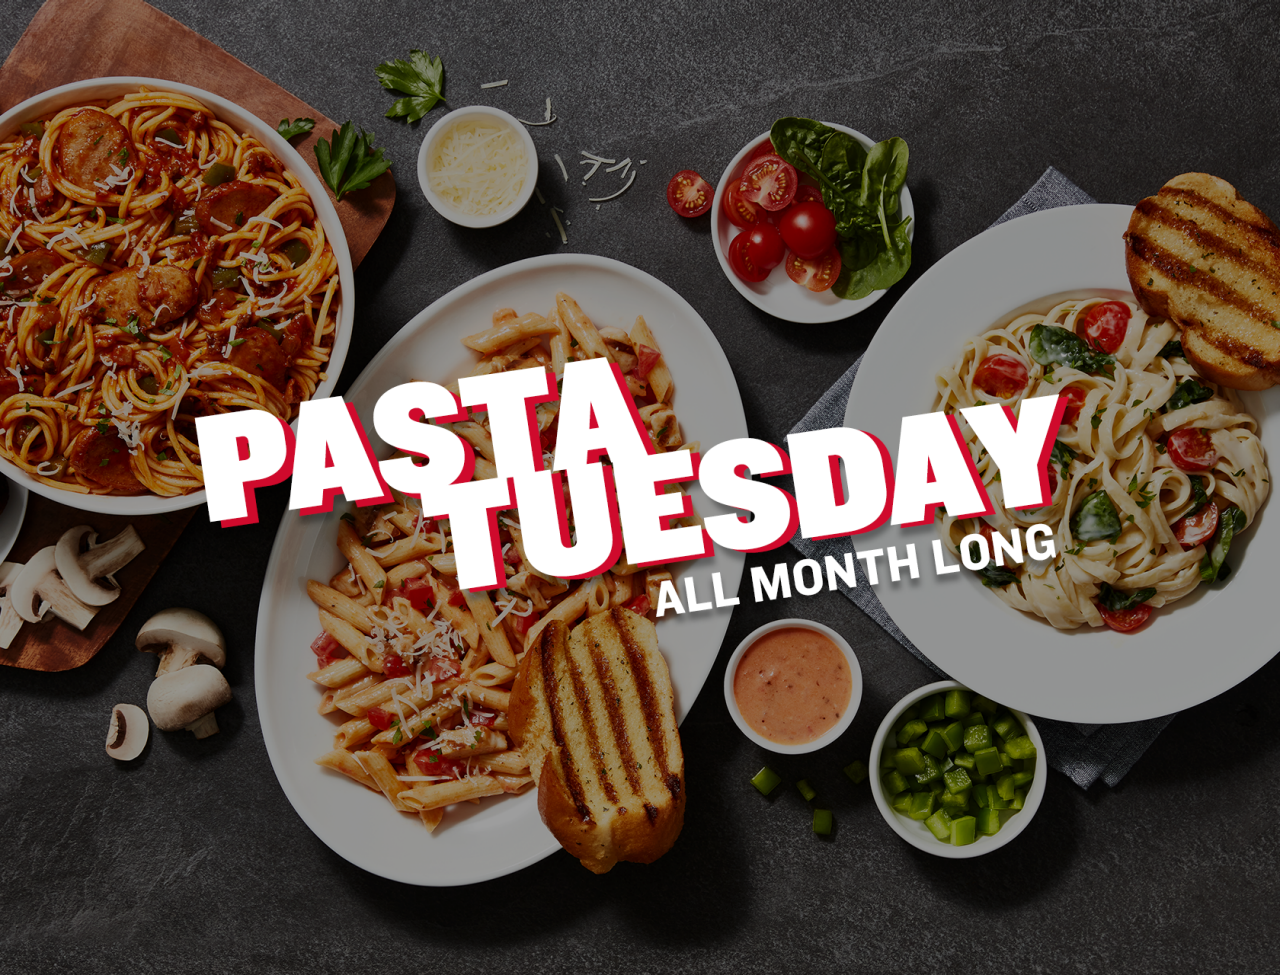 Pasta Tuesday All Month Long